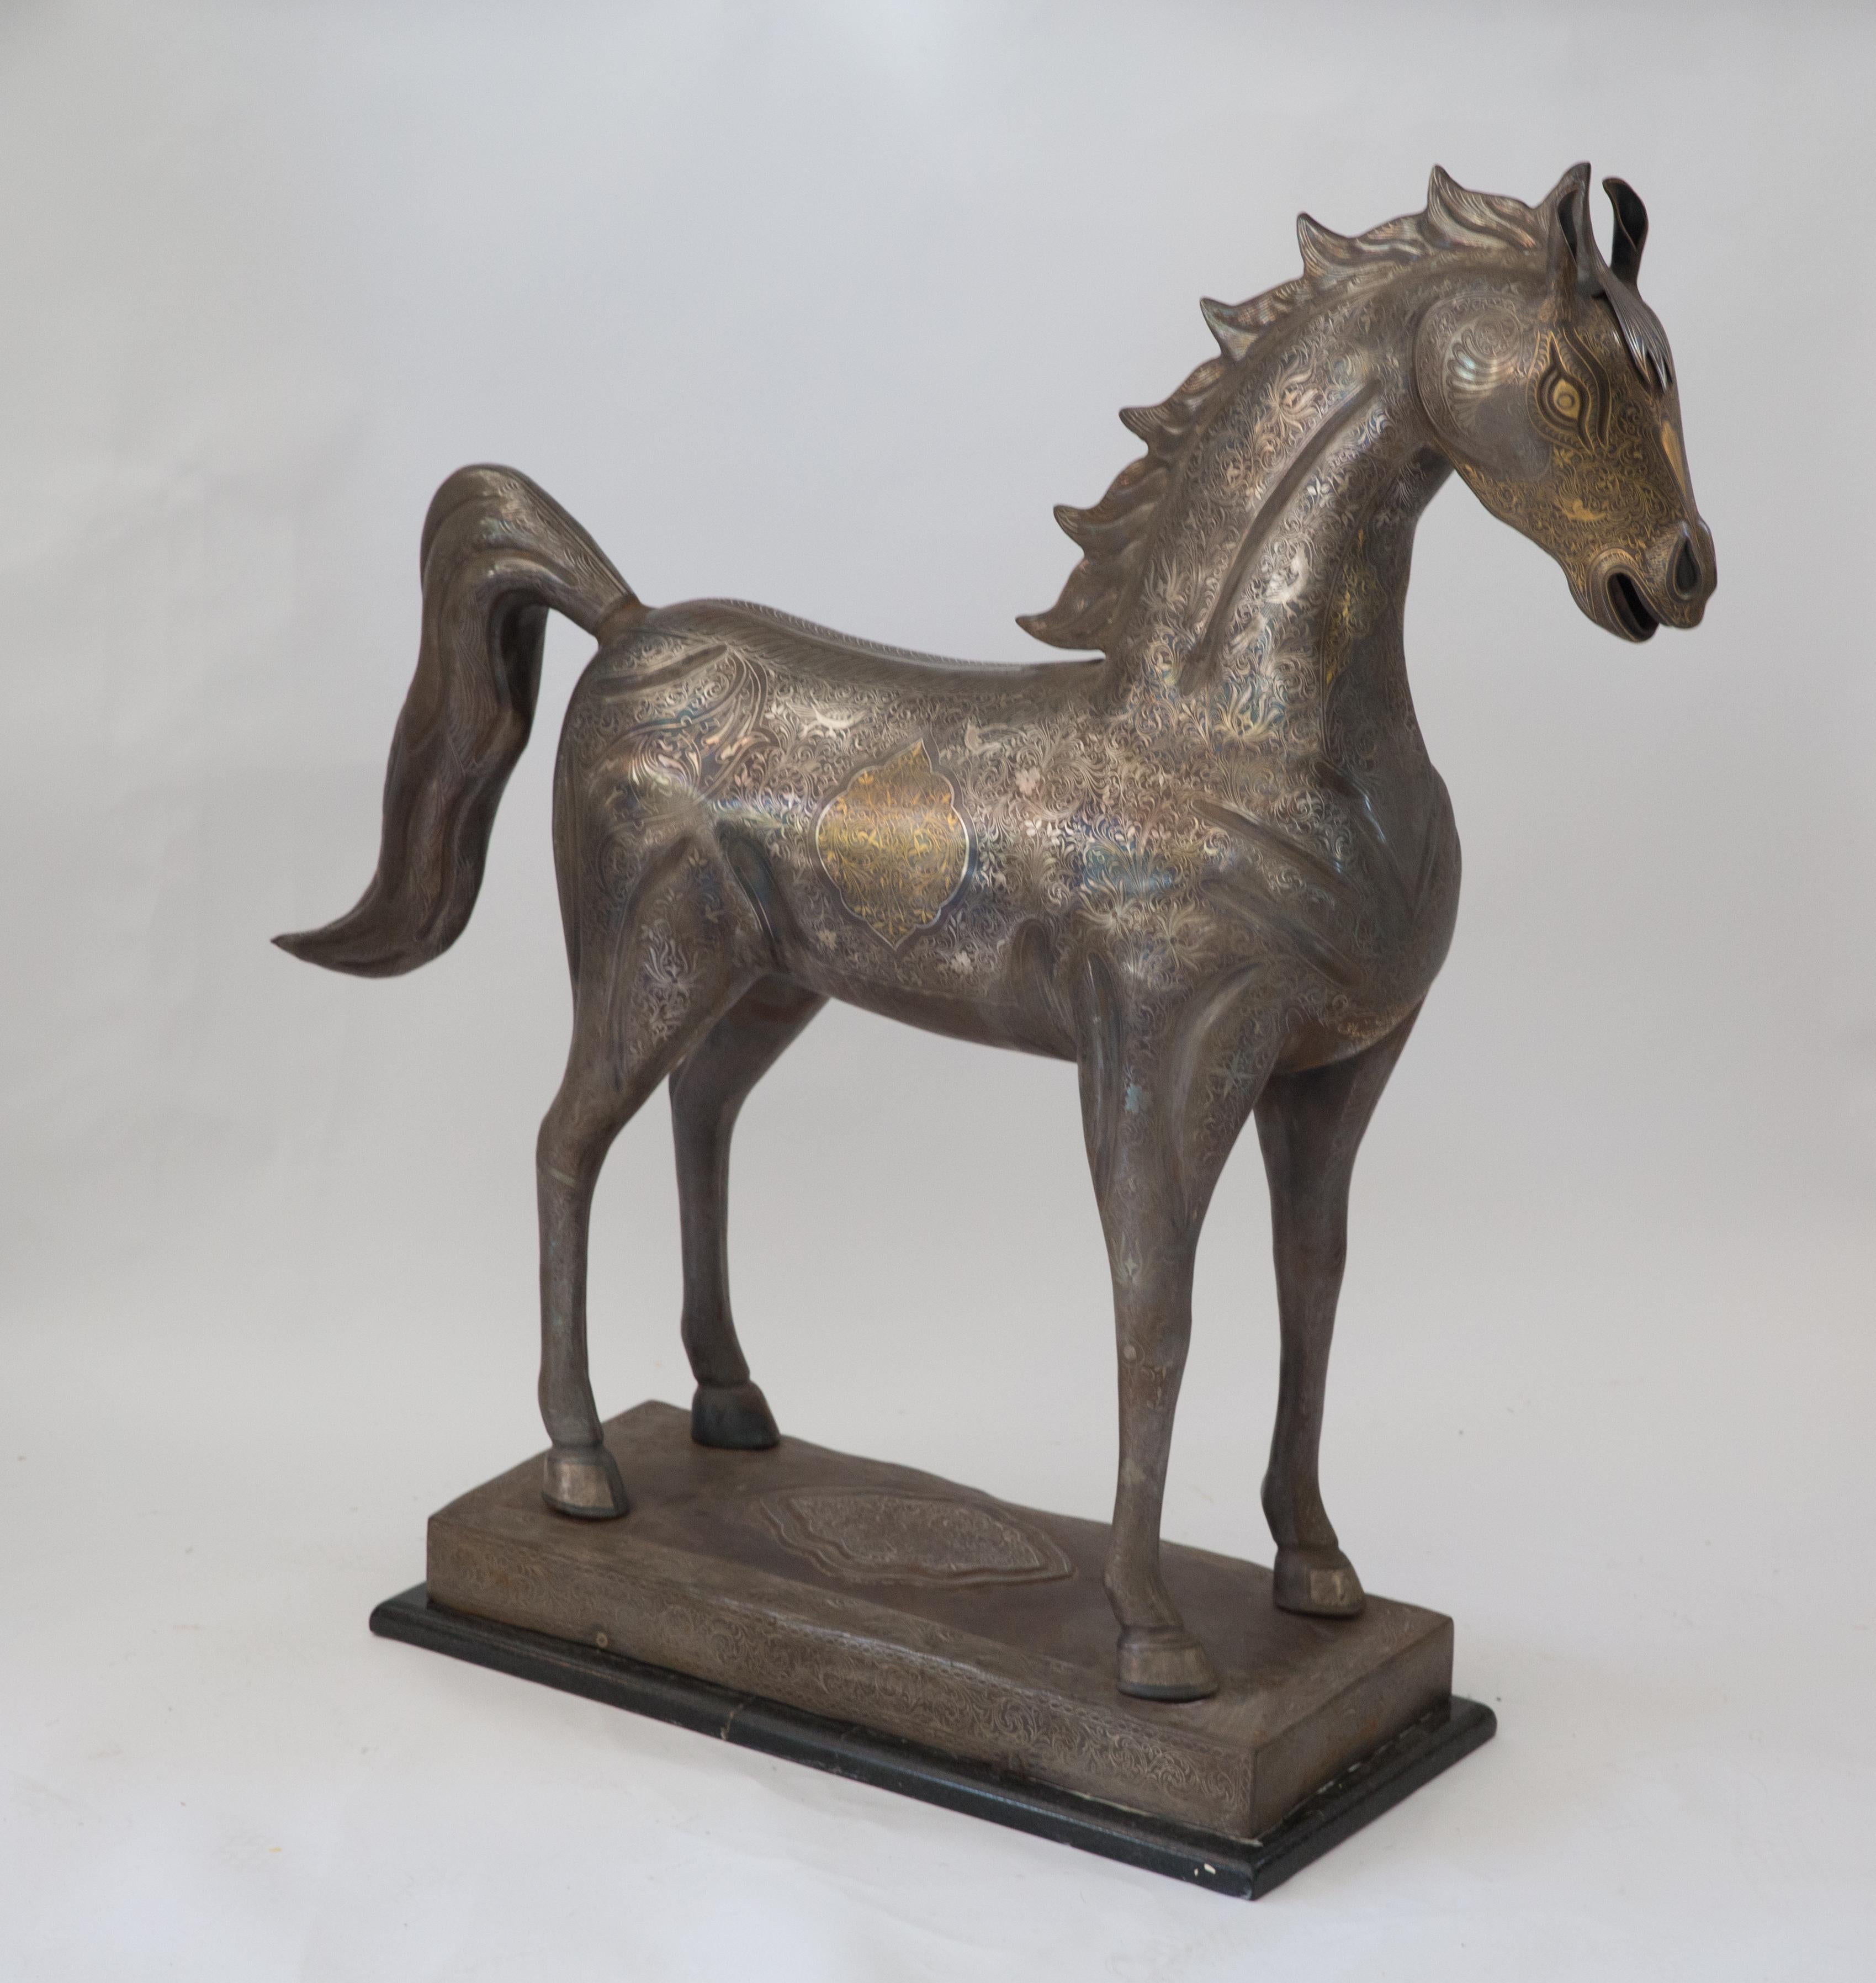 This exceptional unique horse sculpture stands over 3 feet tall and exhibits the artist’s ability to accomplish the most intricate and fine damascene inlay work. The horse’s head, body, legs, feet, mane and tail are all richly inlaid with real gold